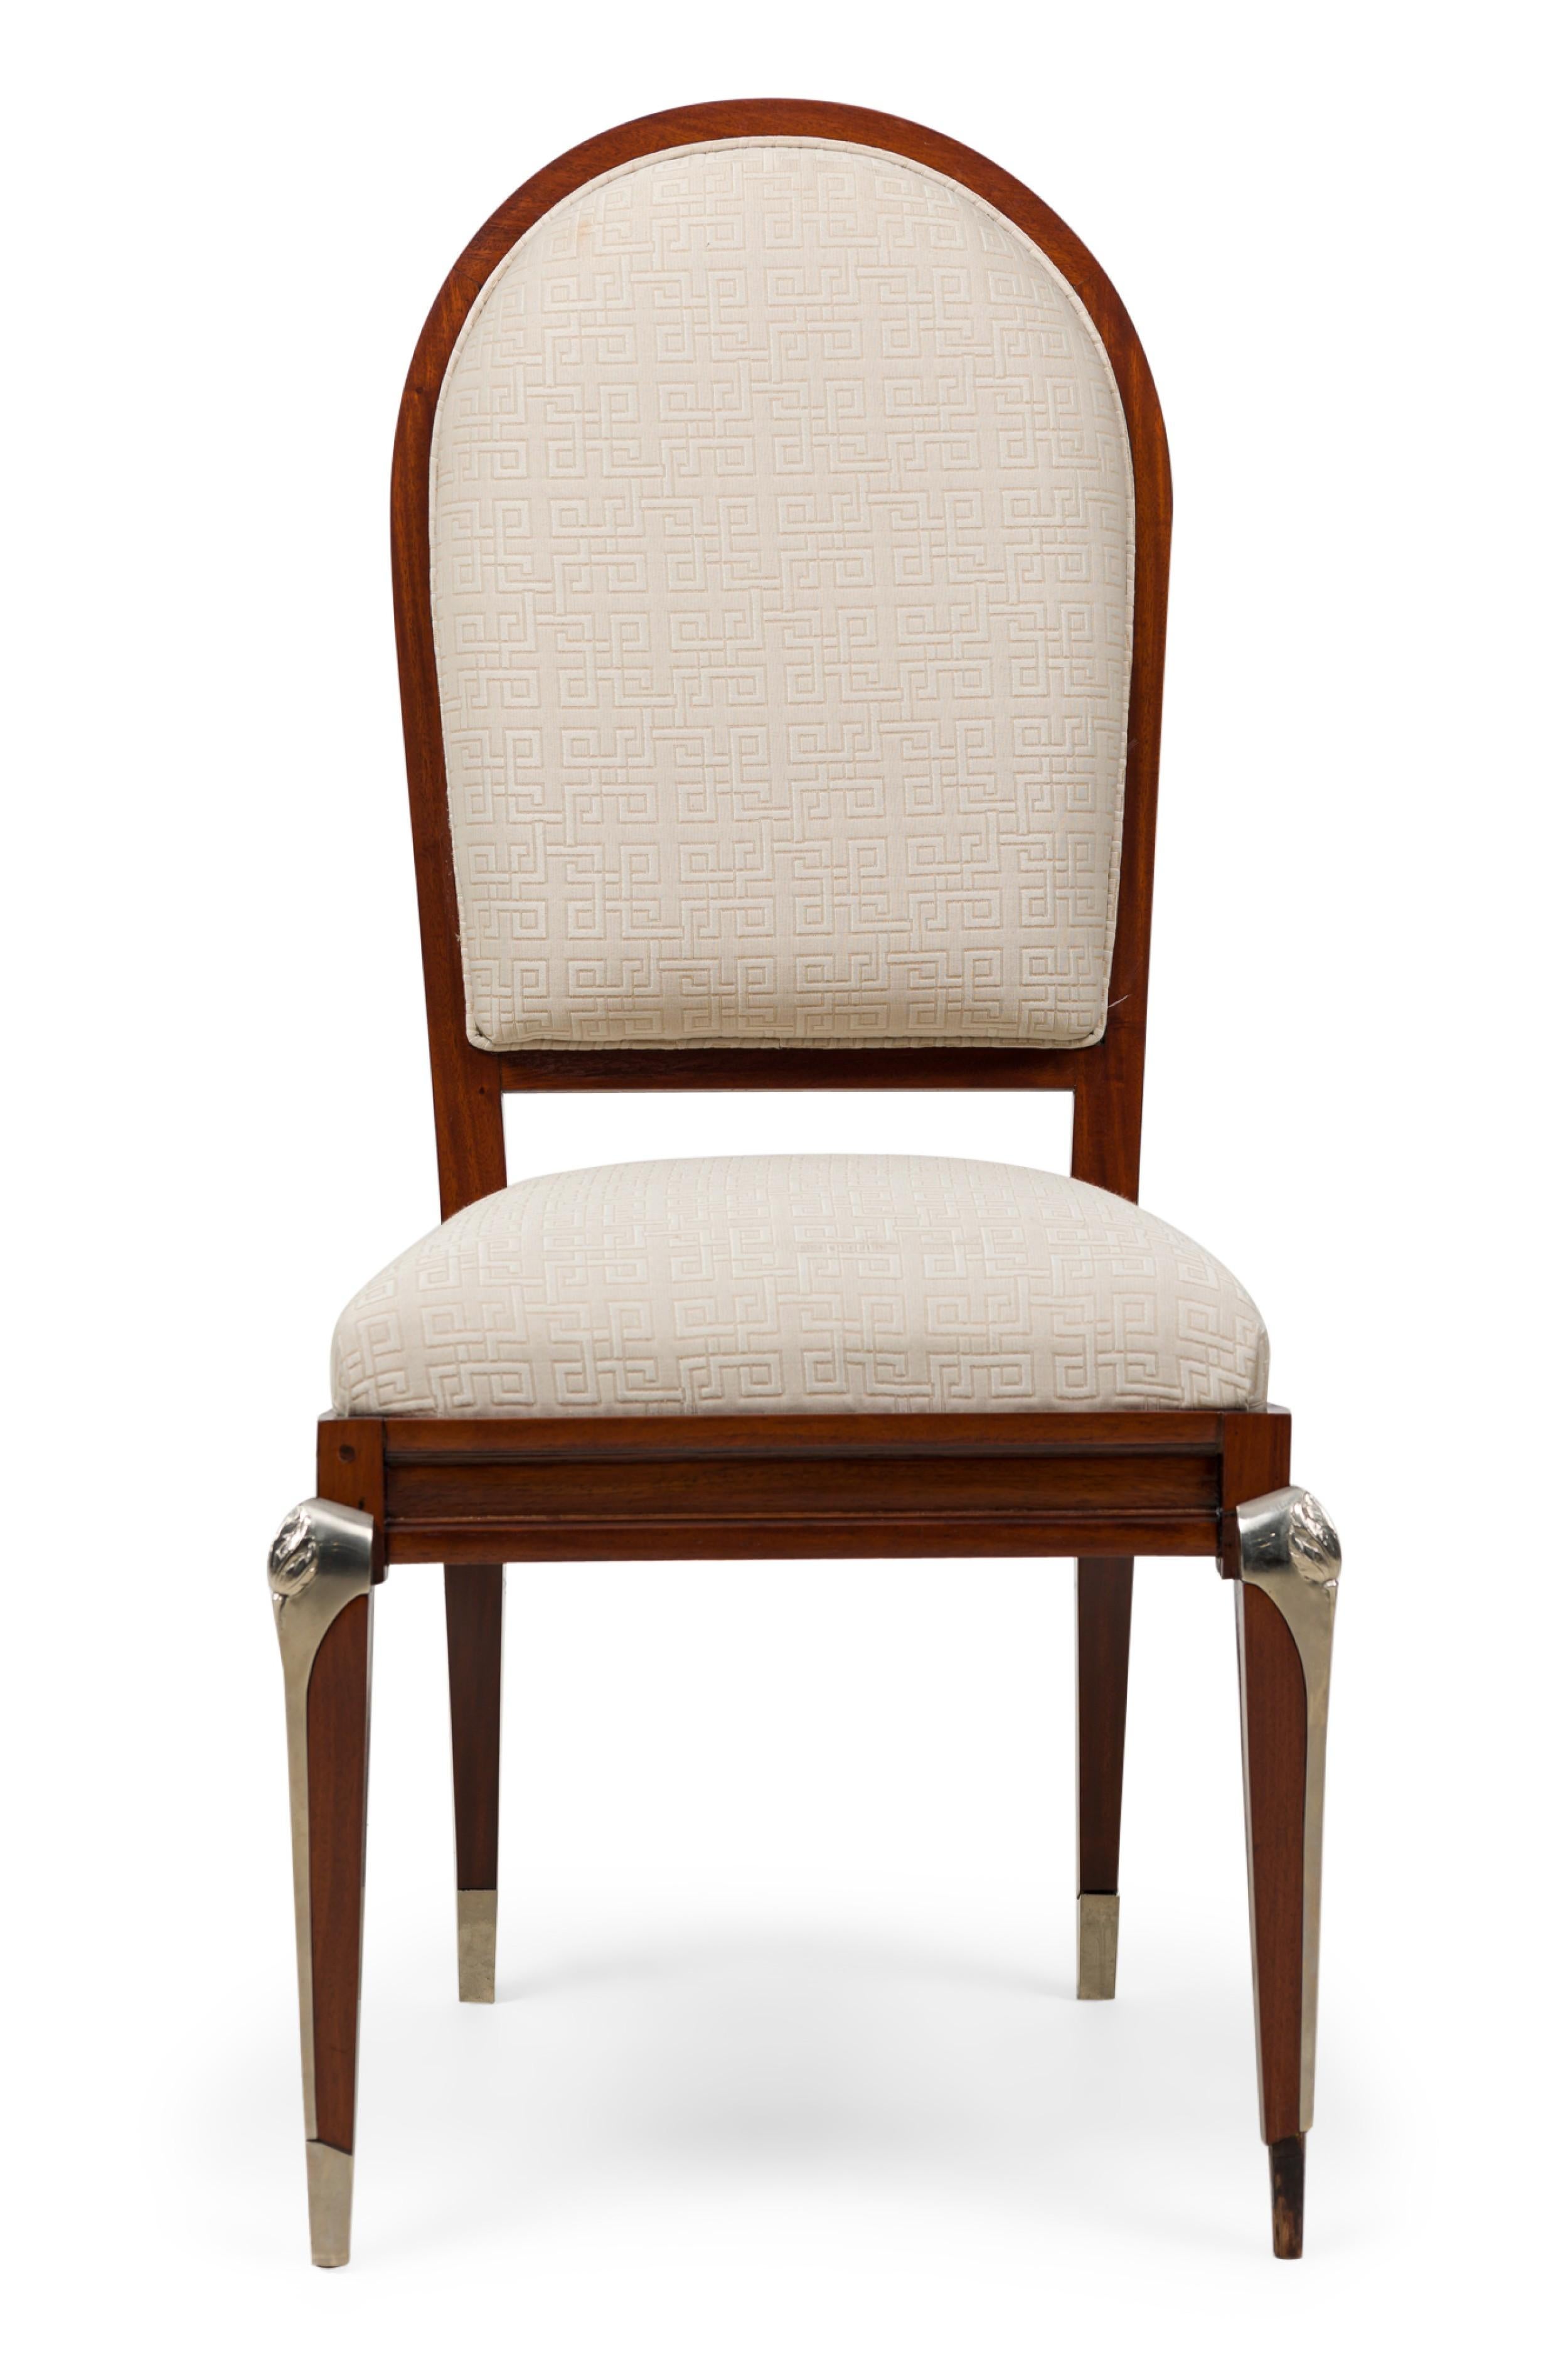 SET of 8 French Mid-Century mahogany dining chairs (2 armchairs, 6 side chairs) with rounded backs and tapered square legs with decorative silvered bronze mounts and sabots, upholstered in a lightly geometrically patterned off-white fabric. (JEAN